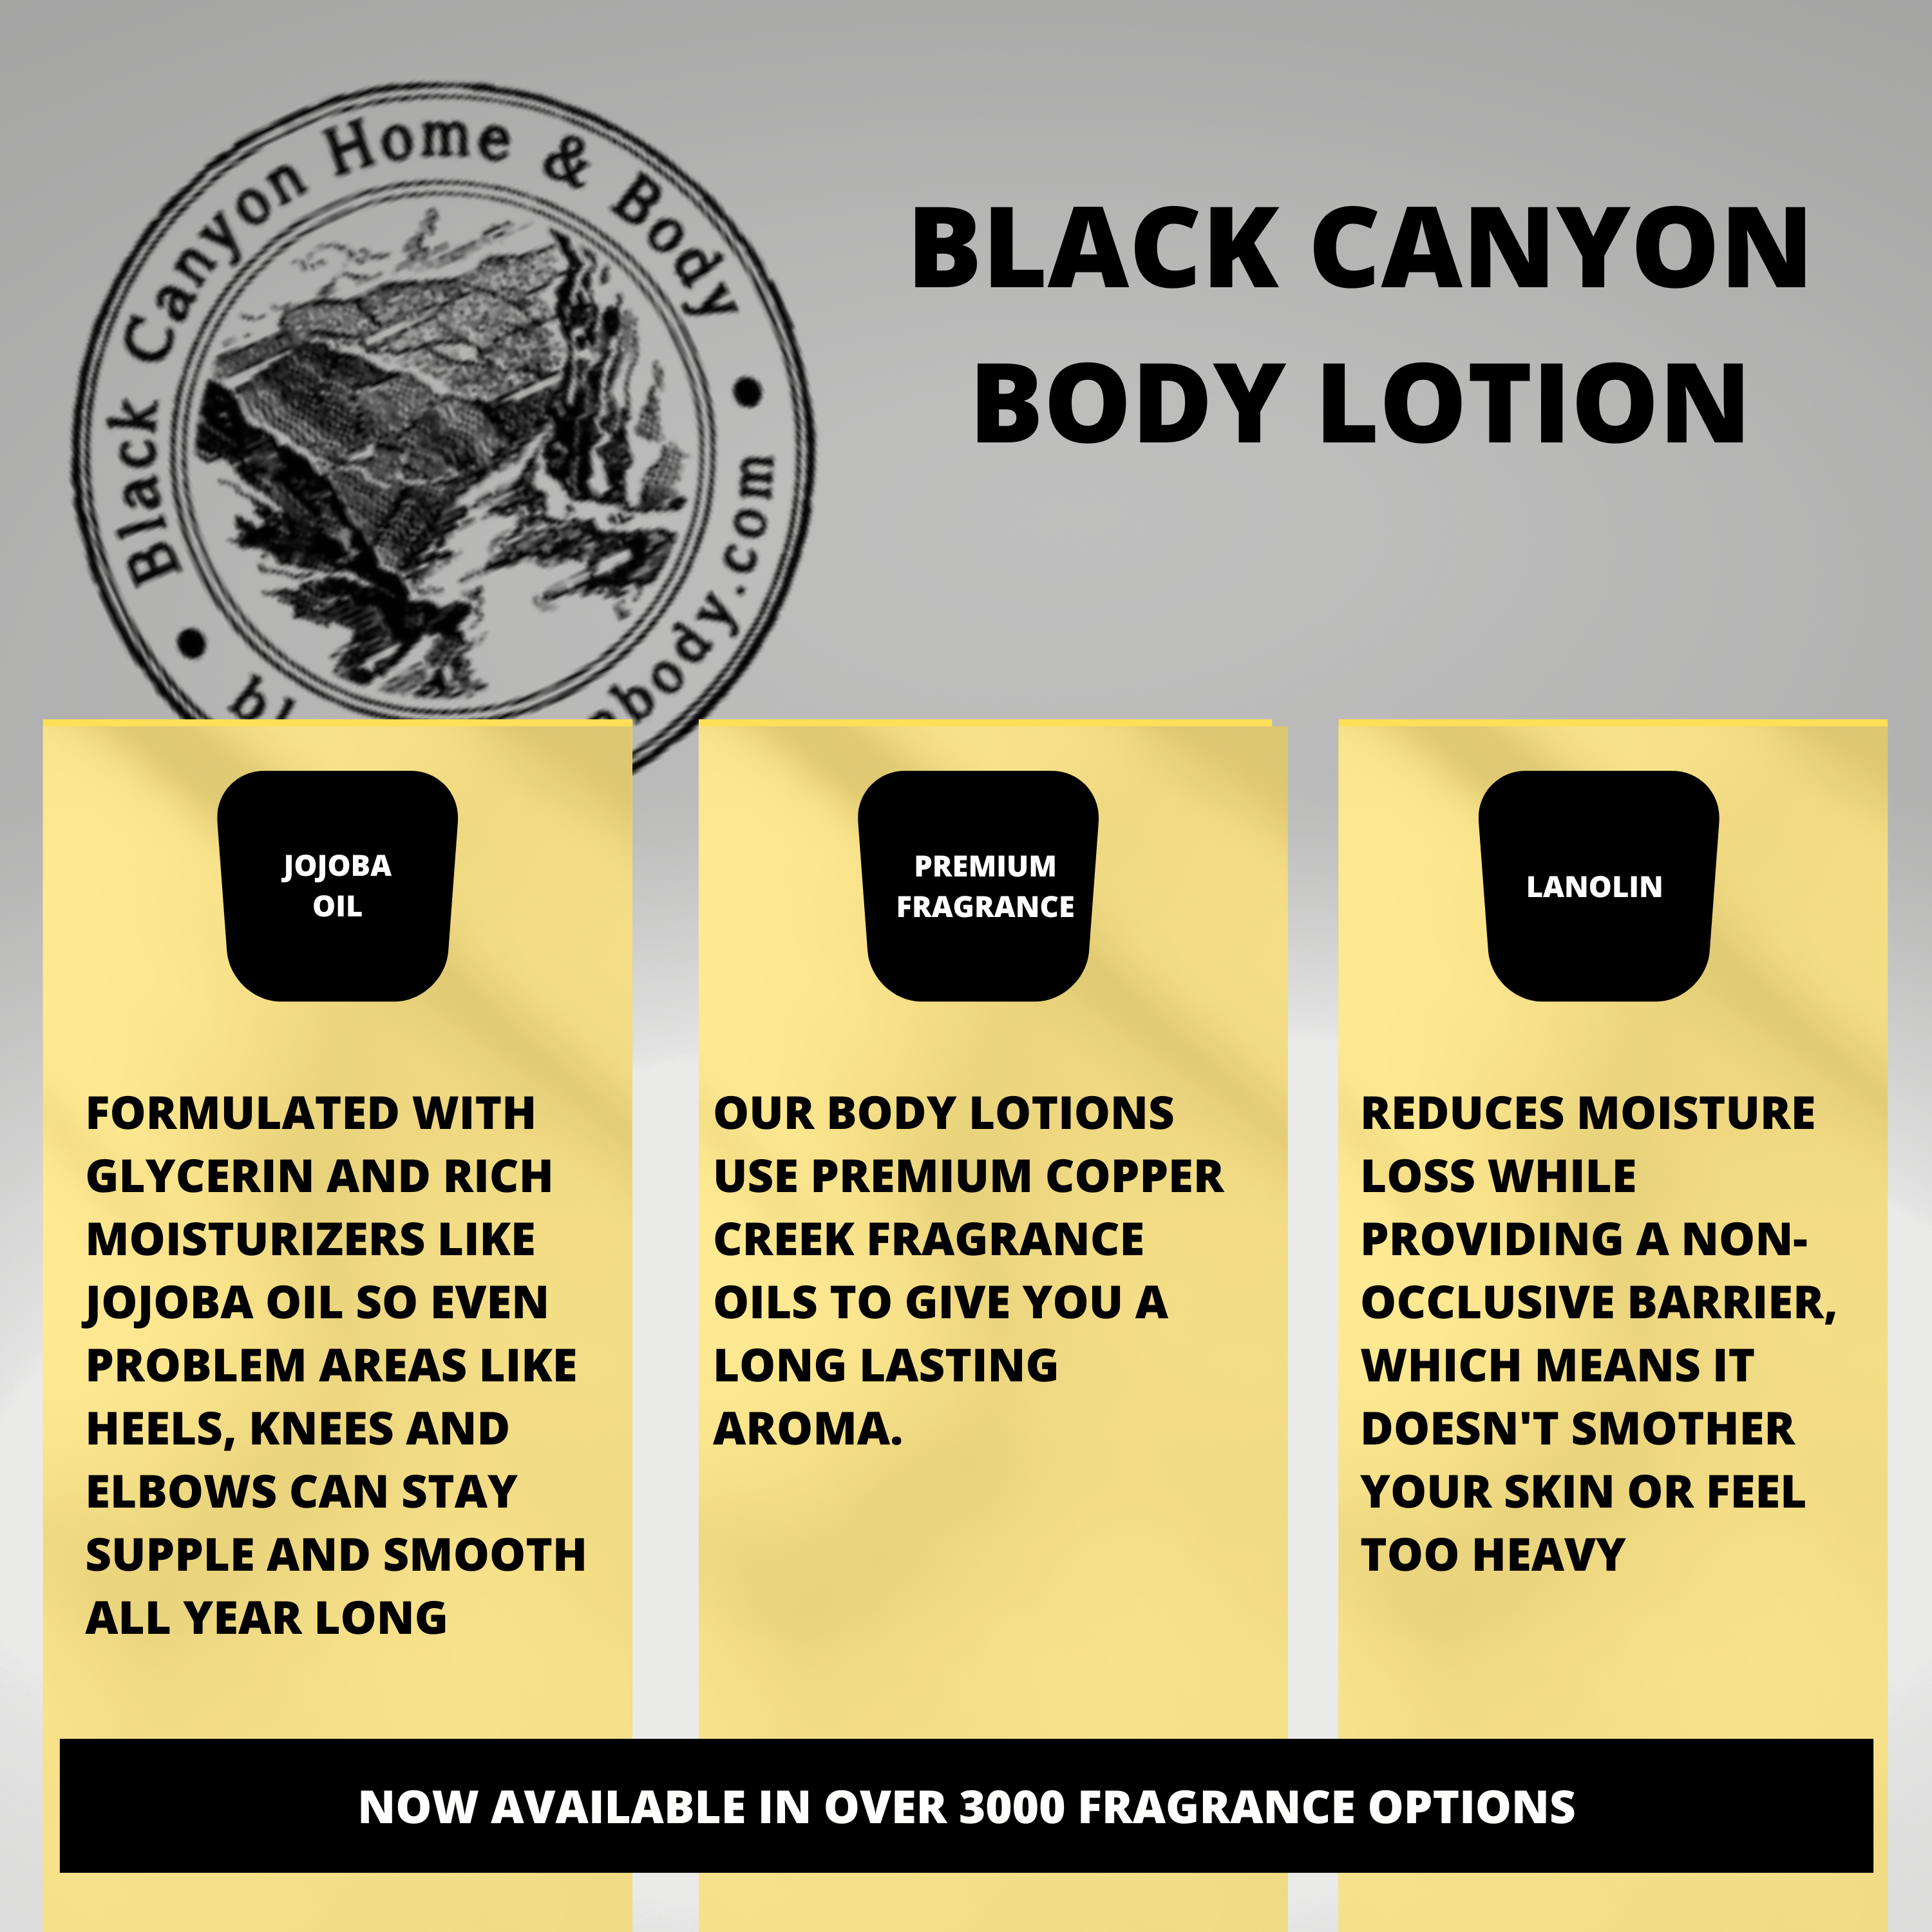 Black Canyon Black Vanilla & Vetiver Scented Luxury Body Lotion with Lanolin and Jojoba Oil